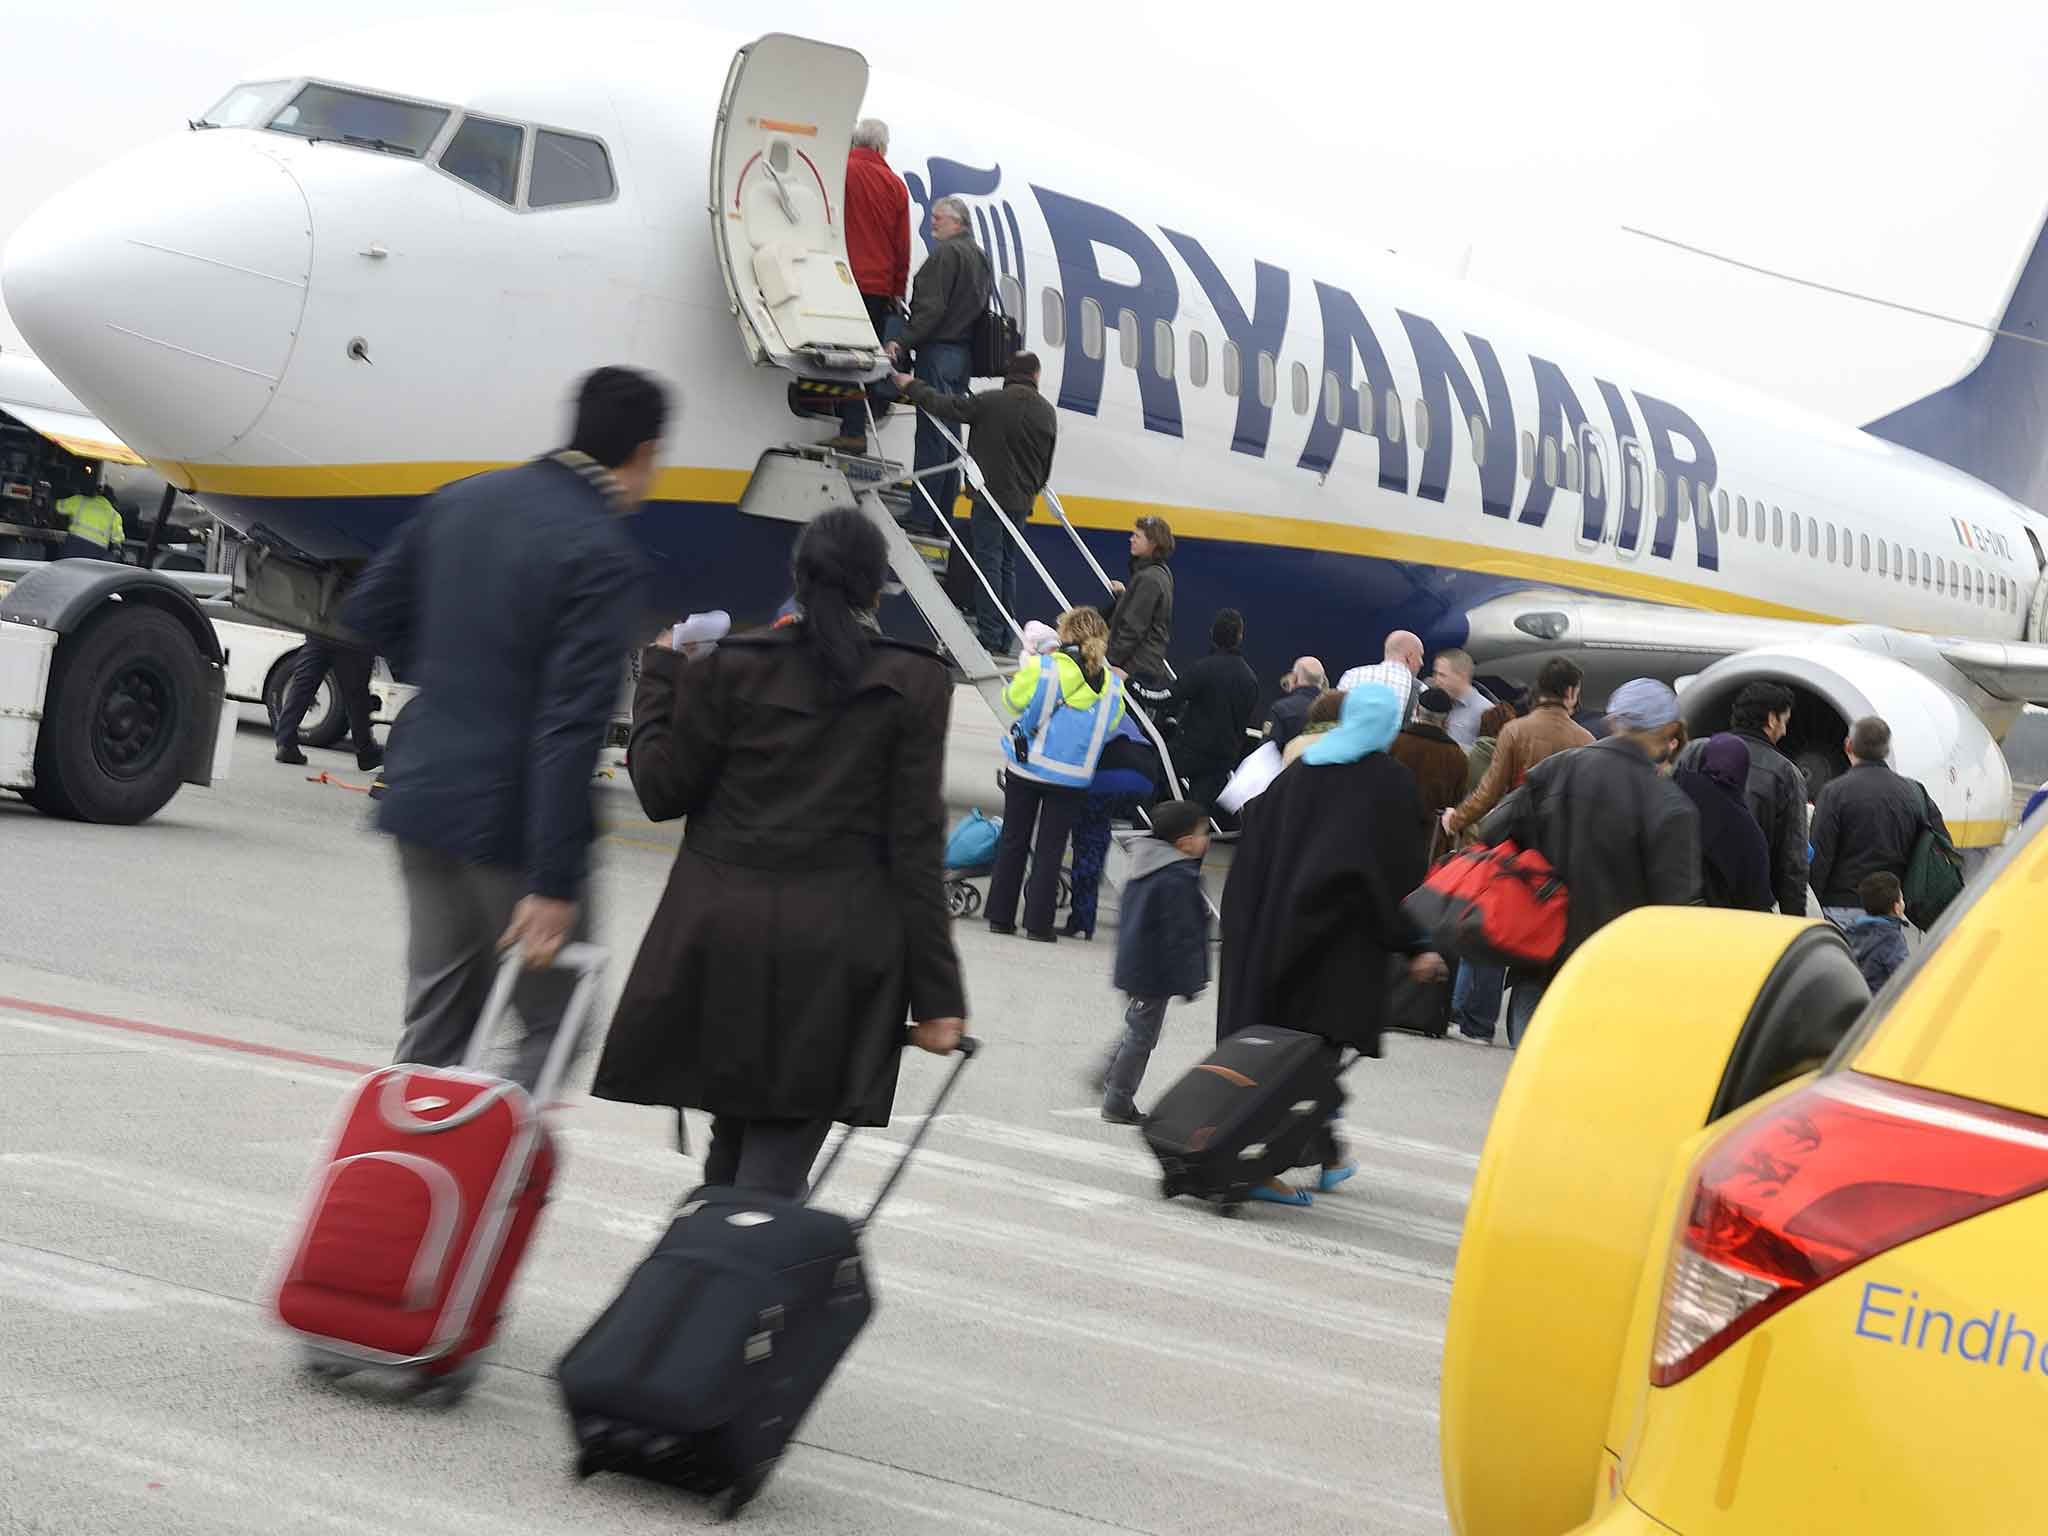 Will Ryanair prevail against its reasonably priced rival?